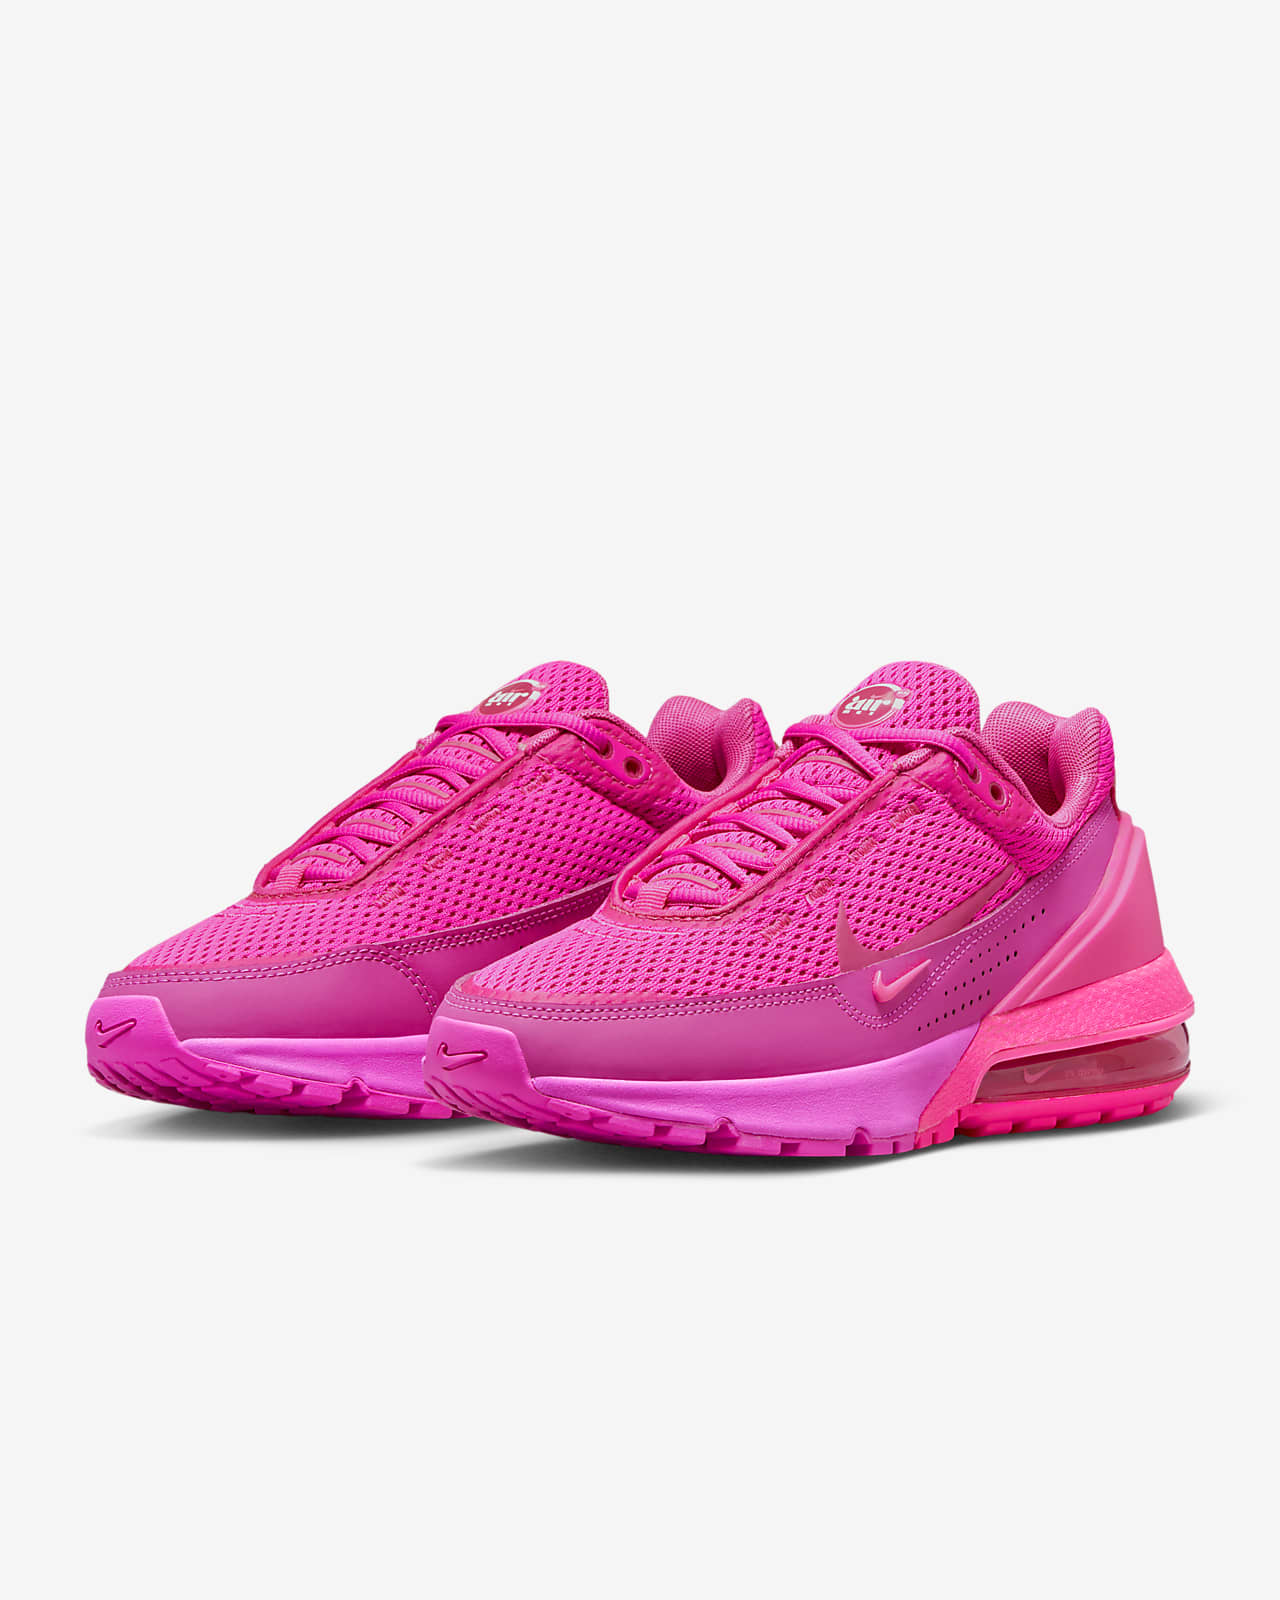 Nike Air Max 2017 Id Women's Running Shoe in Red